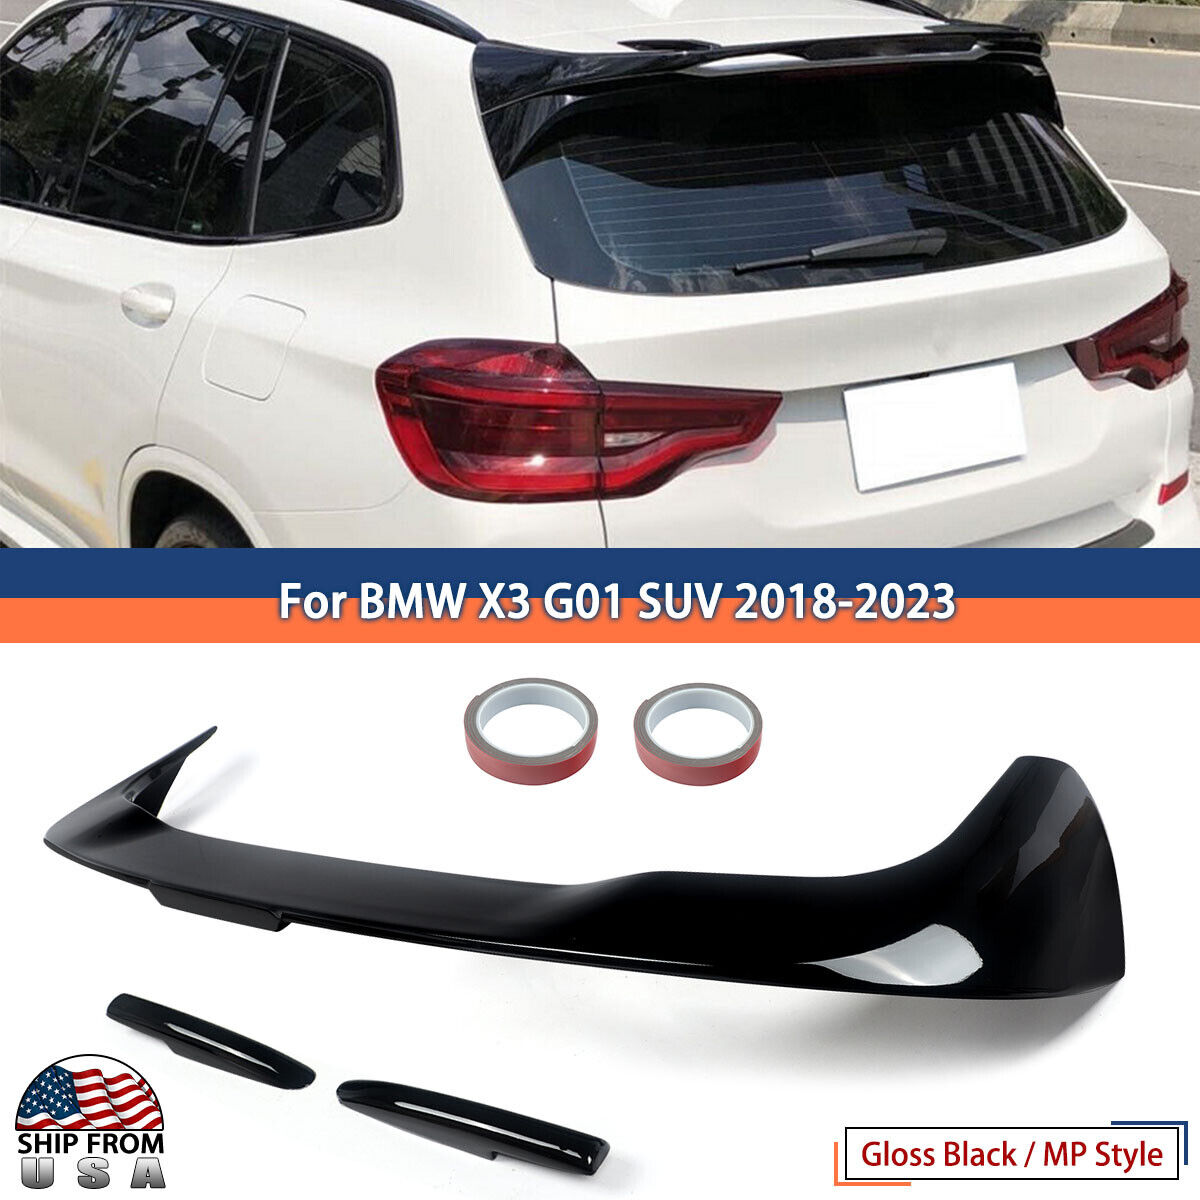 Gloss Black Rear Roof Spoiler Window Wing For BMW F97 X3 M Sport X3 G01 2018-ON